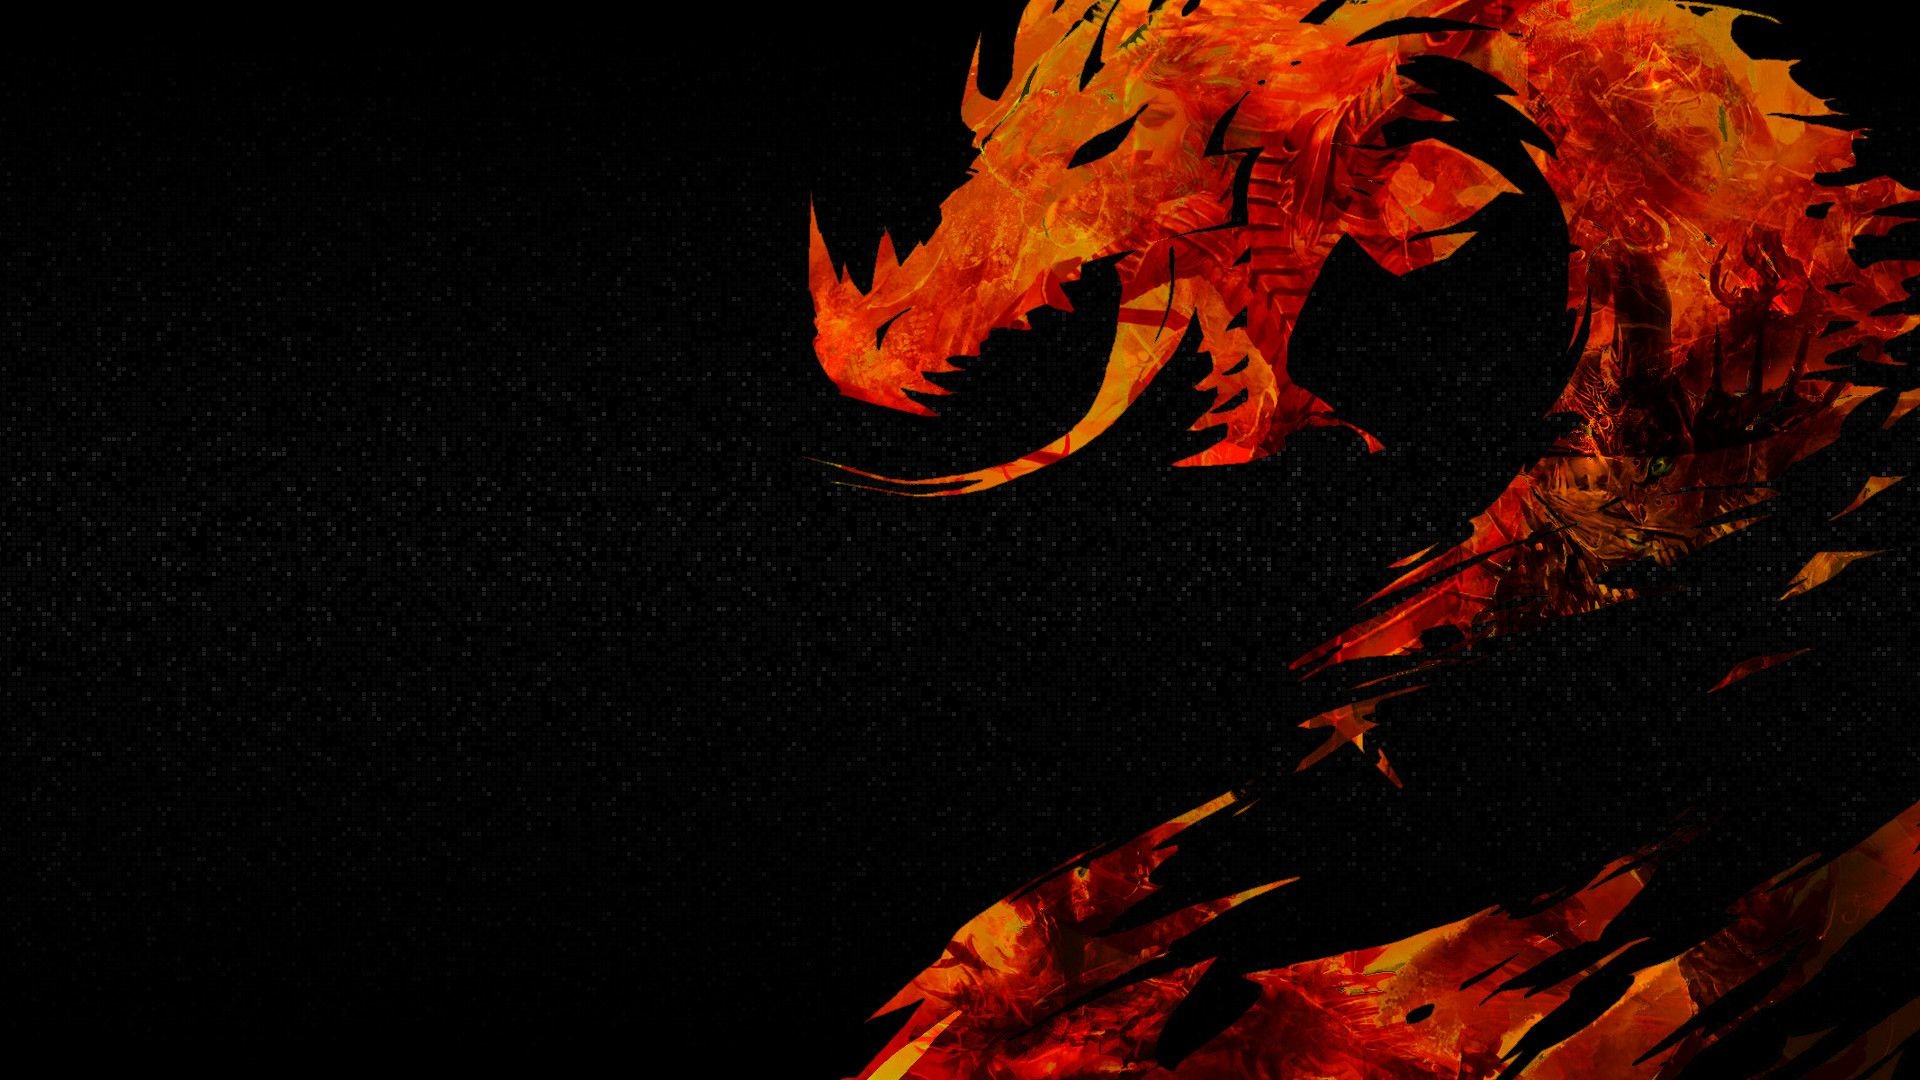 1920x1080 hd guild wars 2 wallpapers amazing images cool background photos windows  wallpapers download widescreen high quality dual monitors 1920Ã1080 Wallpaper  HD